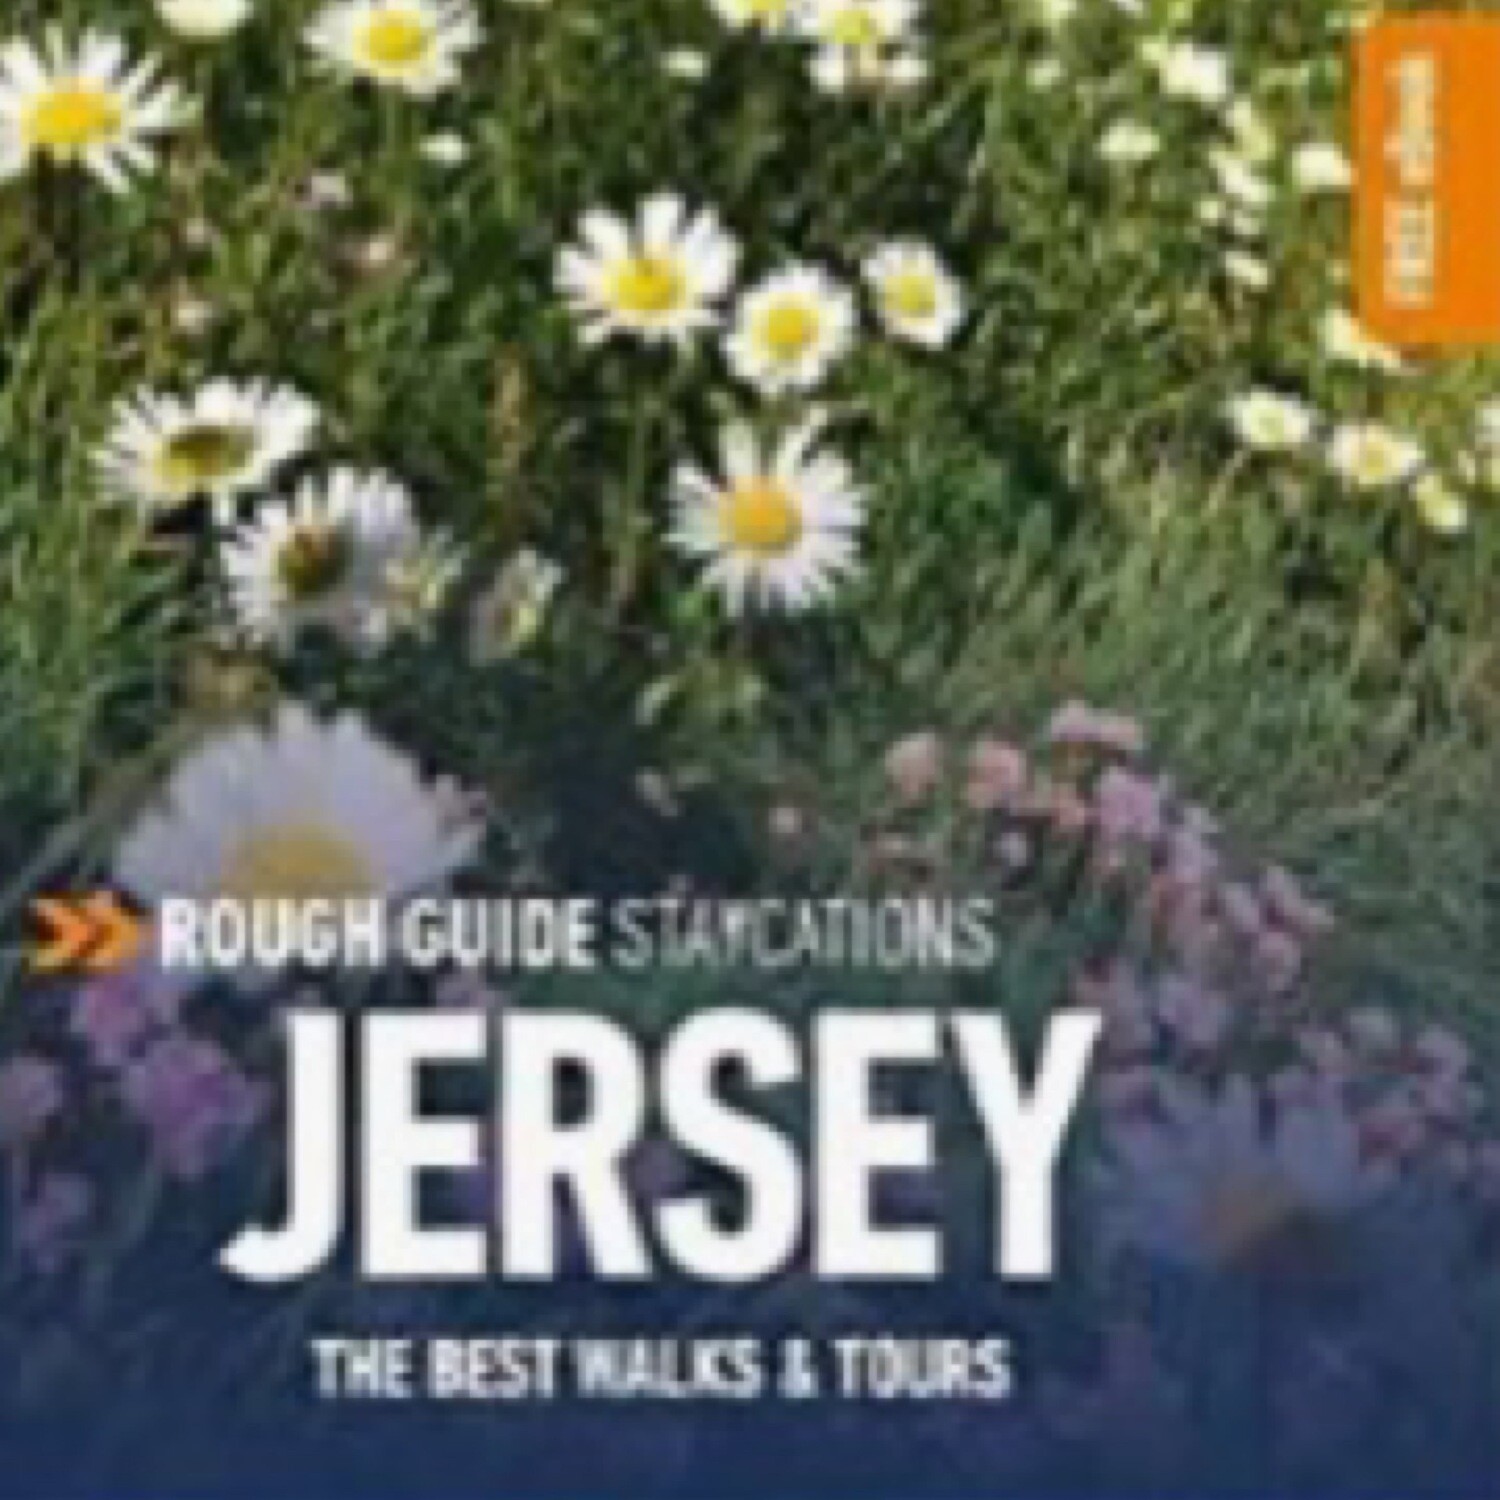 Rough Guide Staycations Jersey